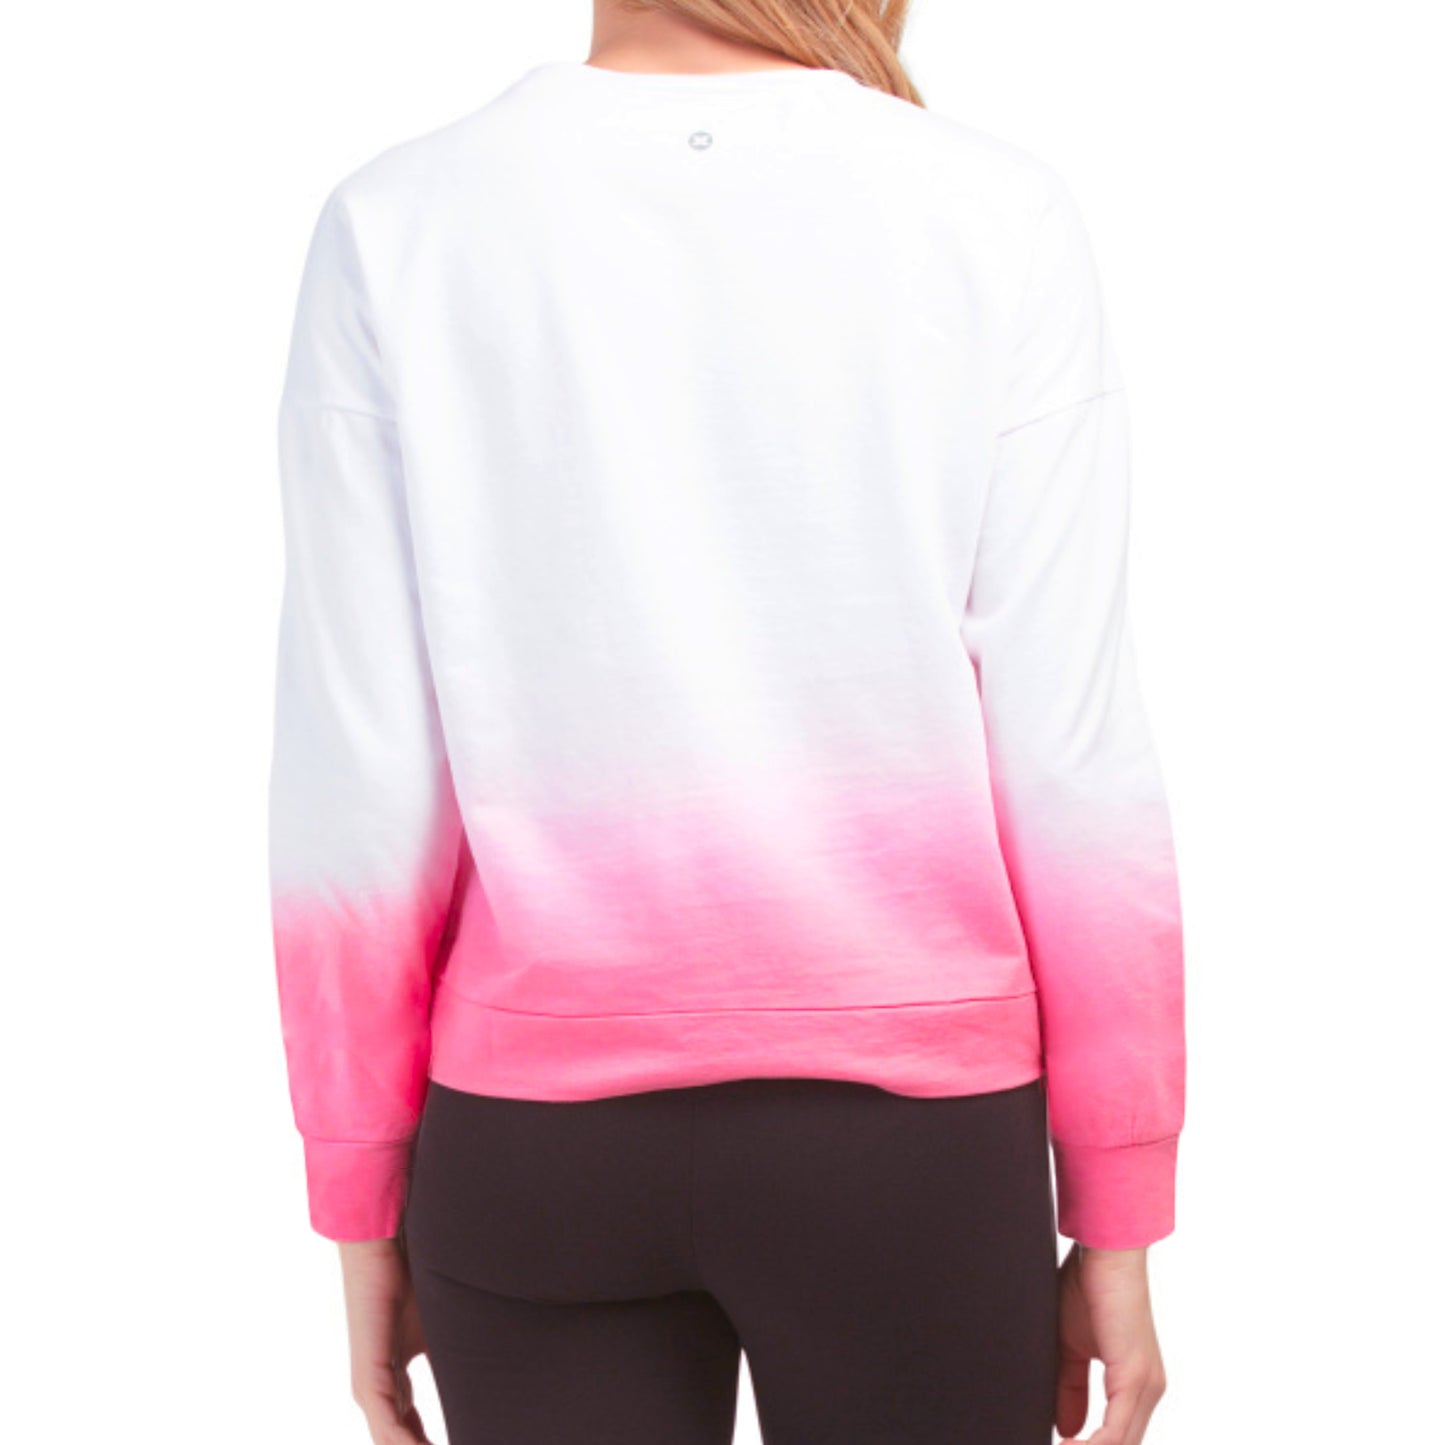 RBX Women's Ombre Dip Dye Cotton French Terry Active Sweatshirt Pullover Top